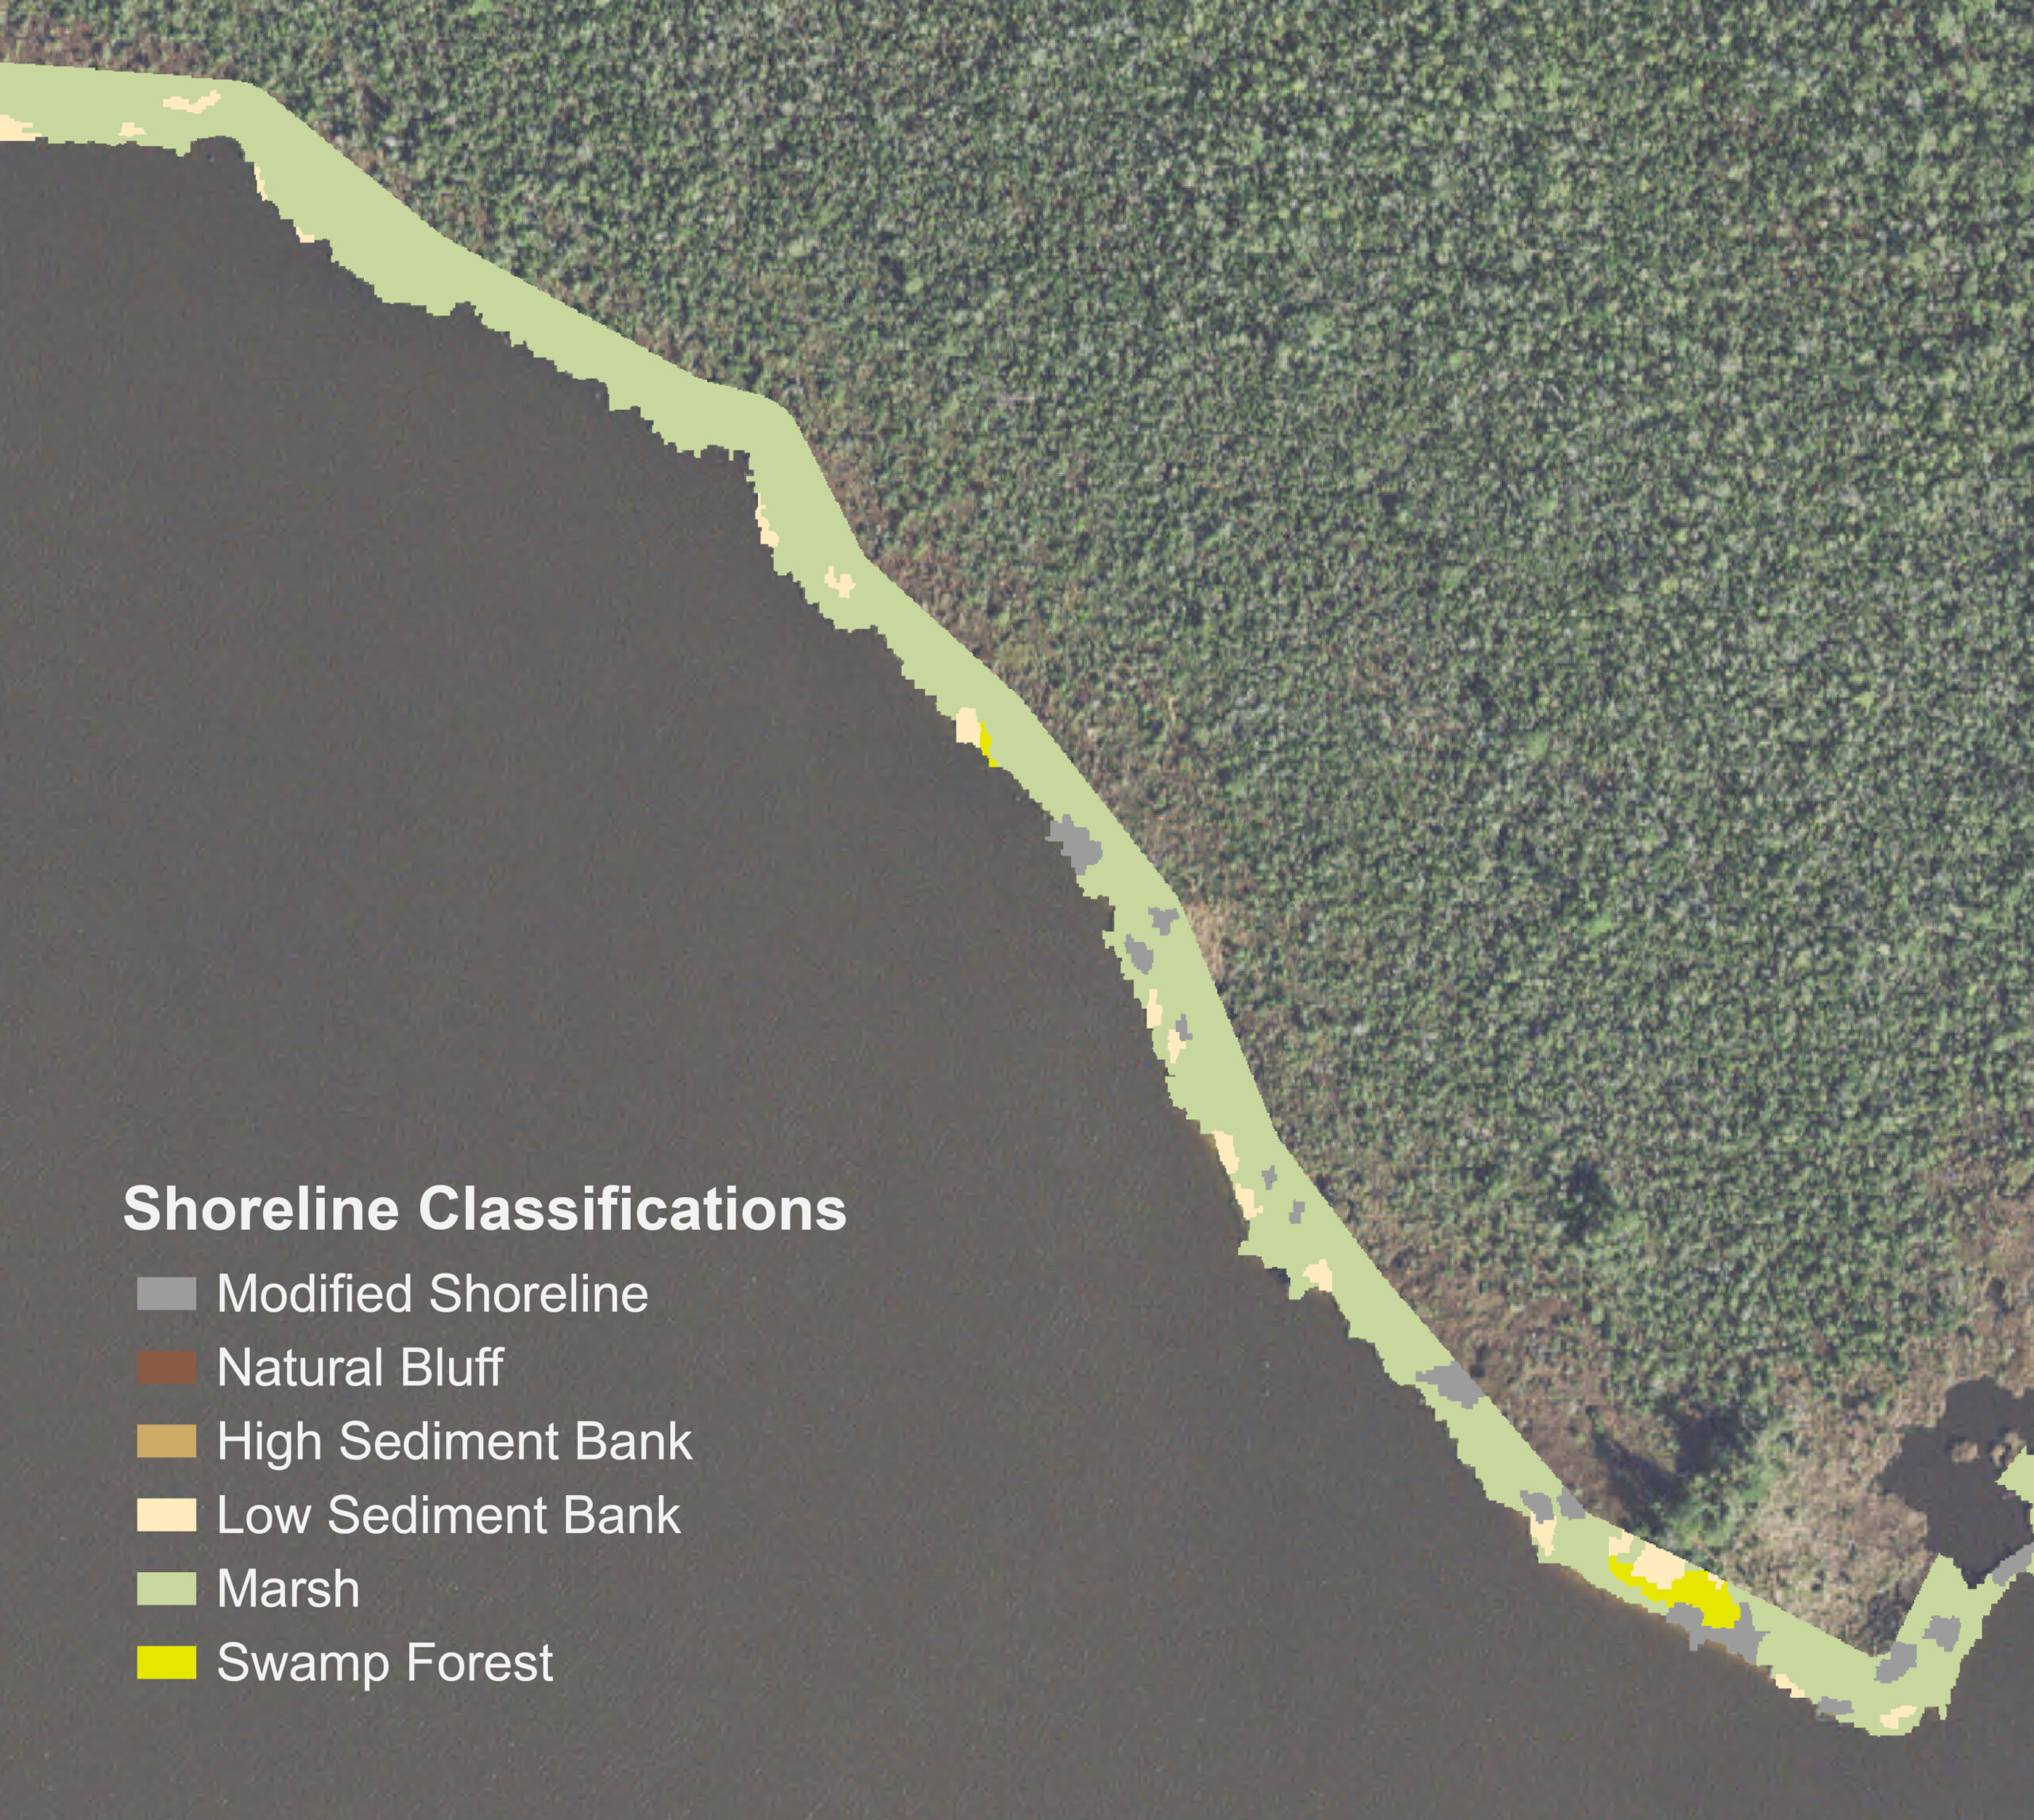 Aerial picture of north Neuse River Estuary overlaid with shoreline classifications: modified shoreline, natural bluff, high sediment bank, low sediment bank, marsh, swamp forest